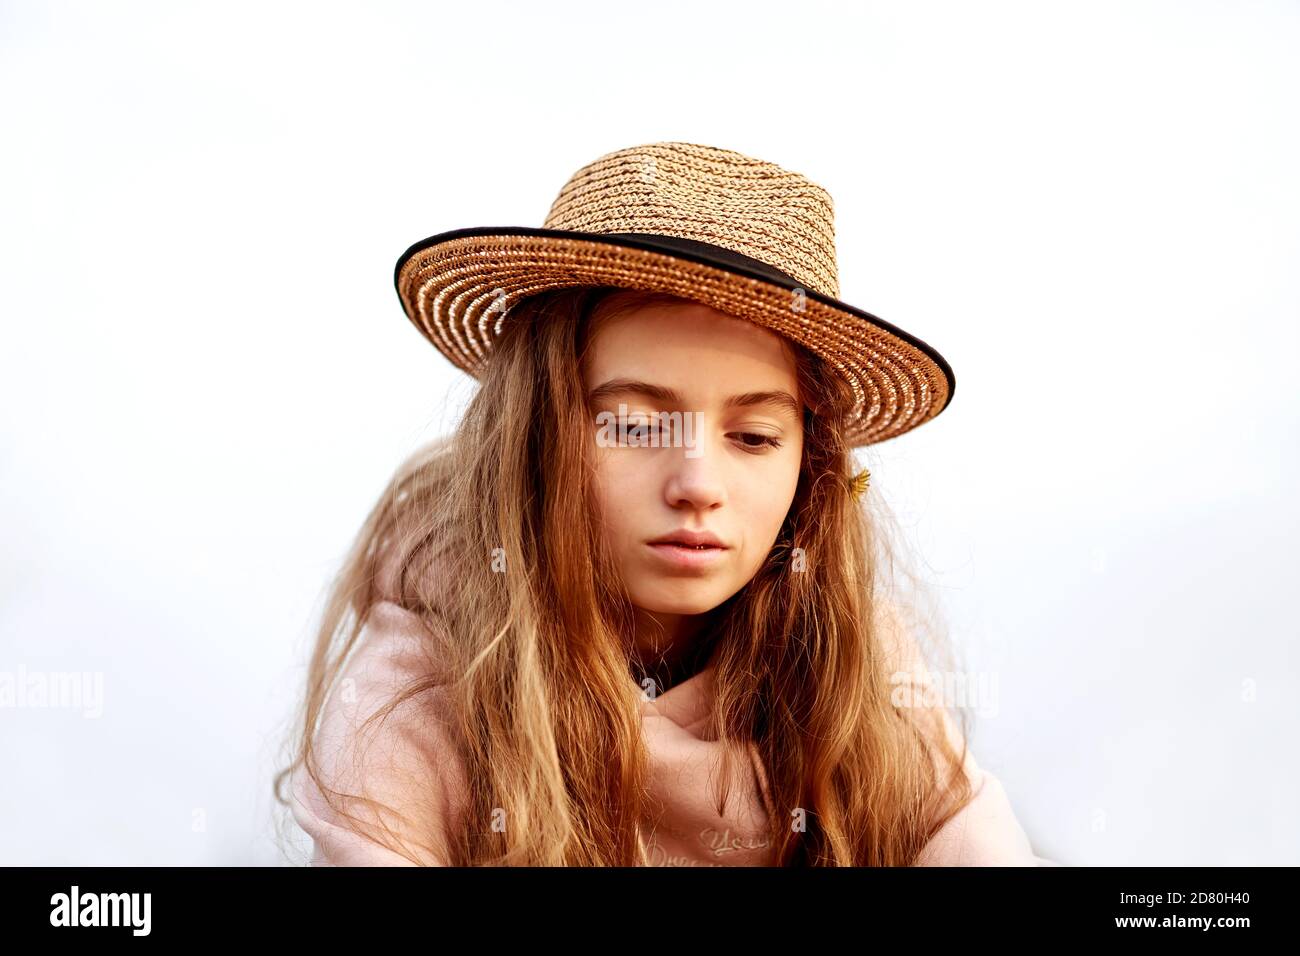 Portrait of a beautiful teenage girl in a straw hat against the sky looking down. Stock Photo